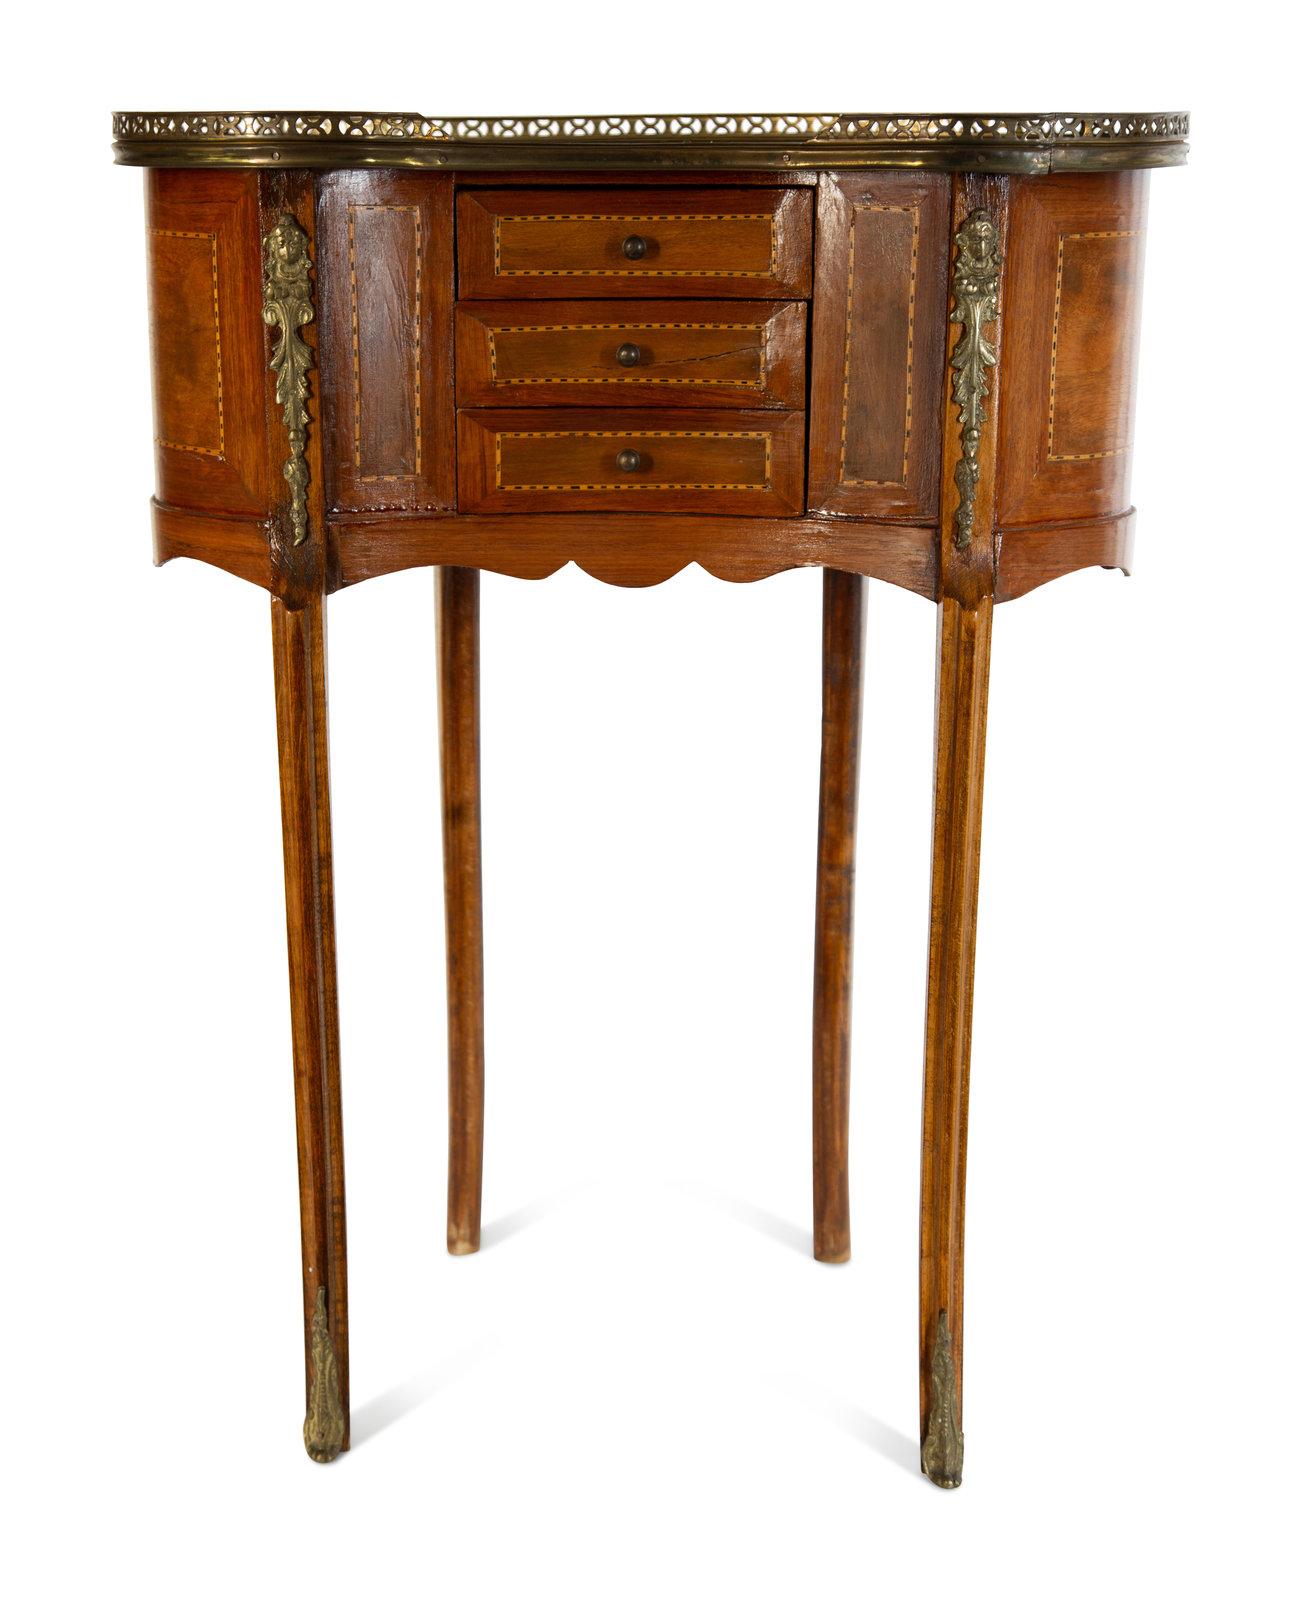 Fruitwood marble top kidney shape side table with three drawers and a brass gallery, late 19th century.
 